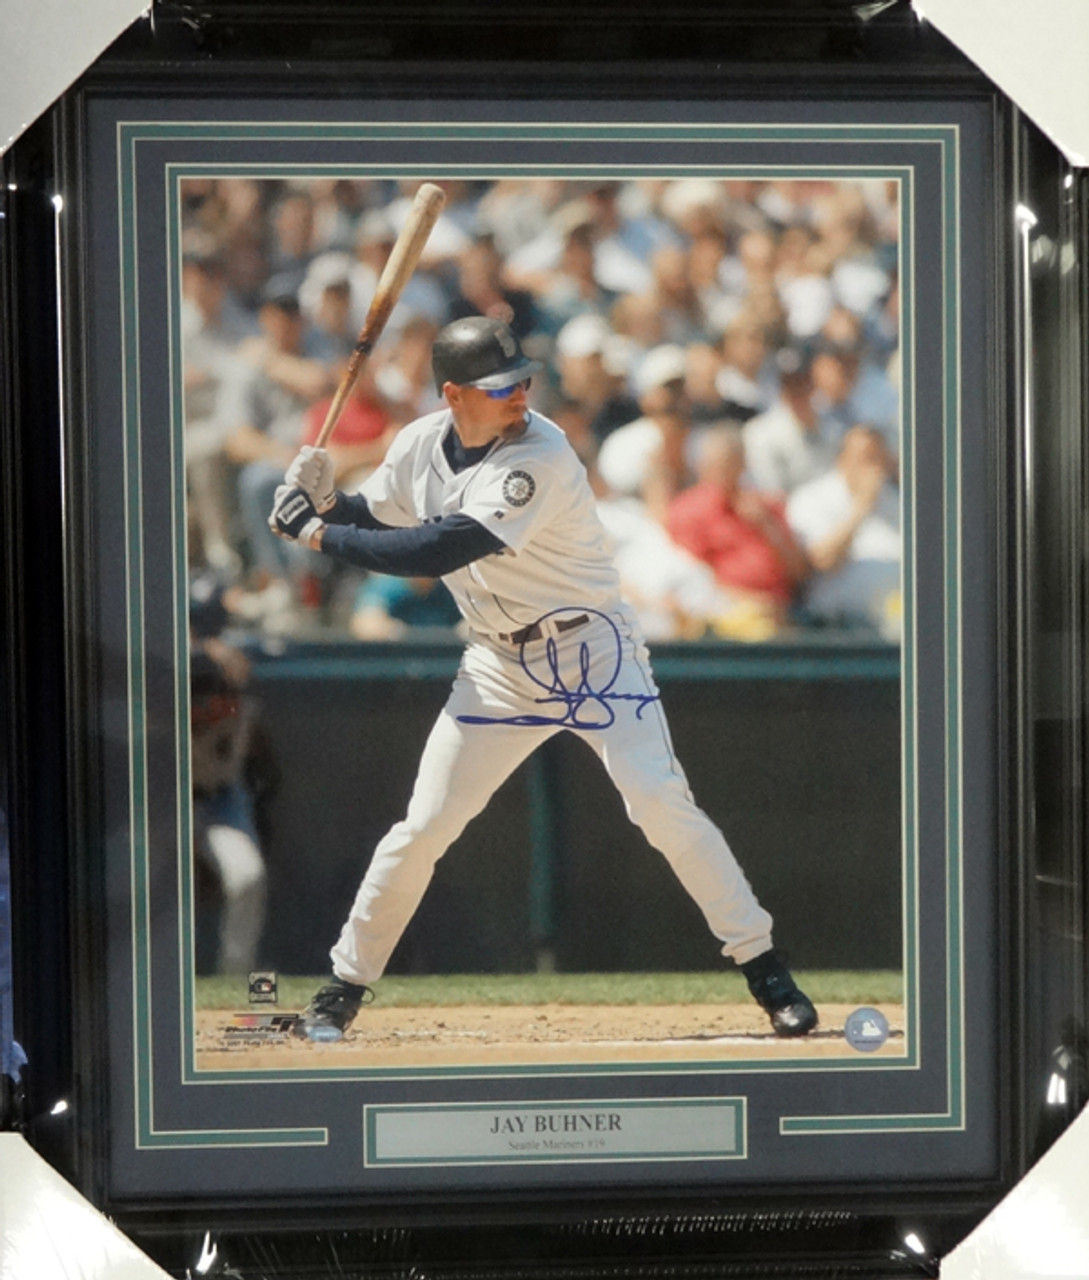 Jay Buhner Autographed Framed 16x20 Photo Seattle Mariners MCS Holo Stock  #94165 - Mill Creek Sports